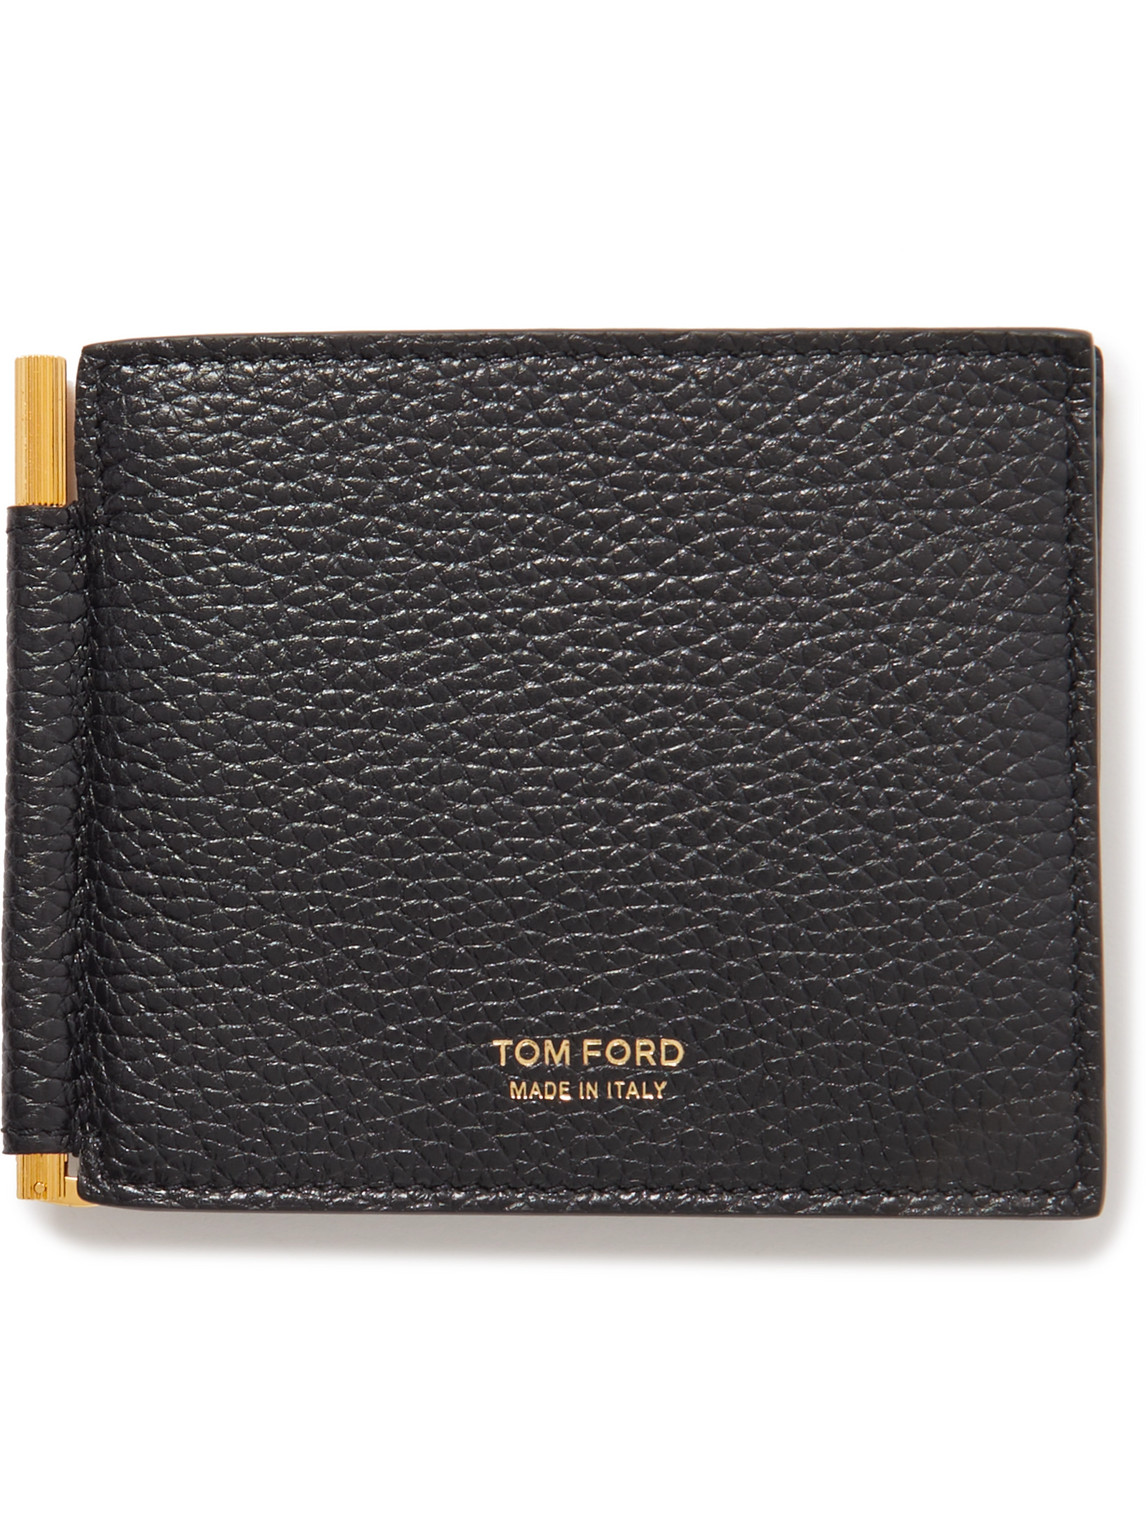 Tom Ford Full-grain Leather Billfold Wallet With Money Clip In Black